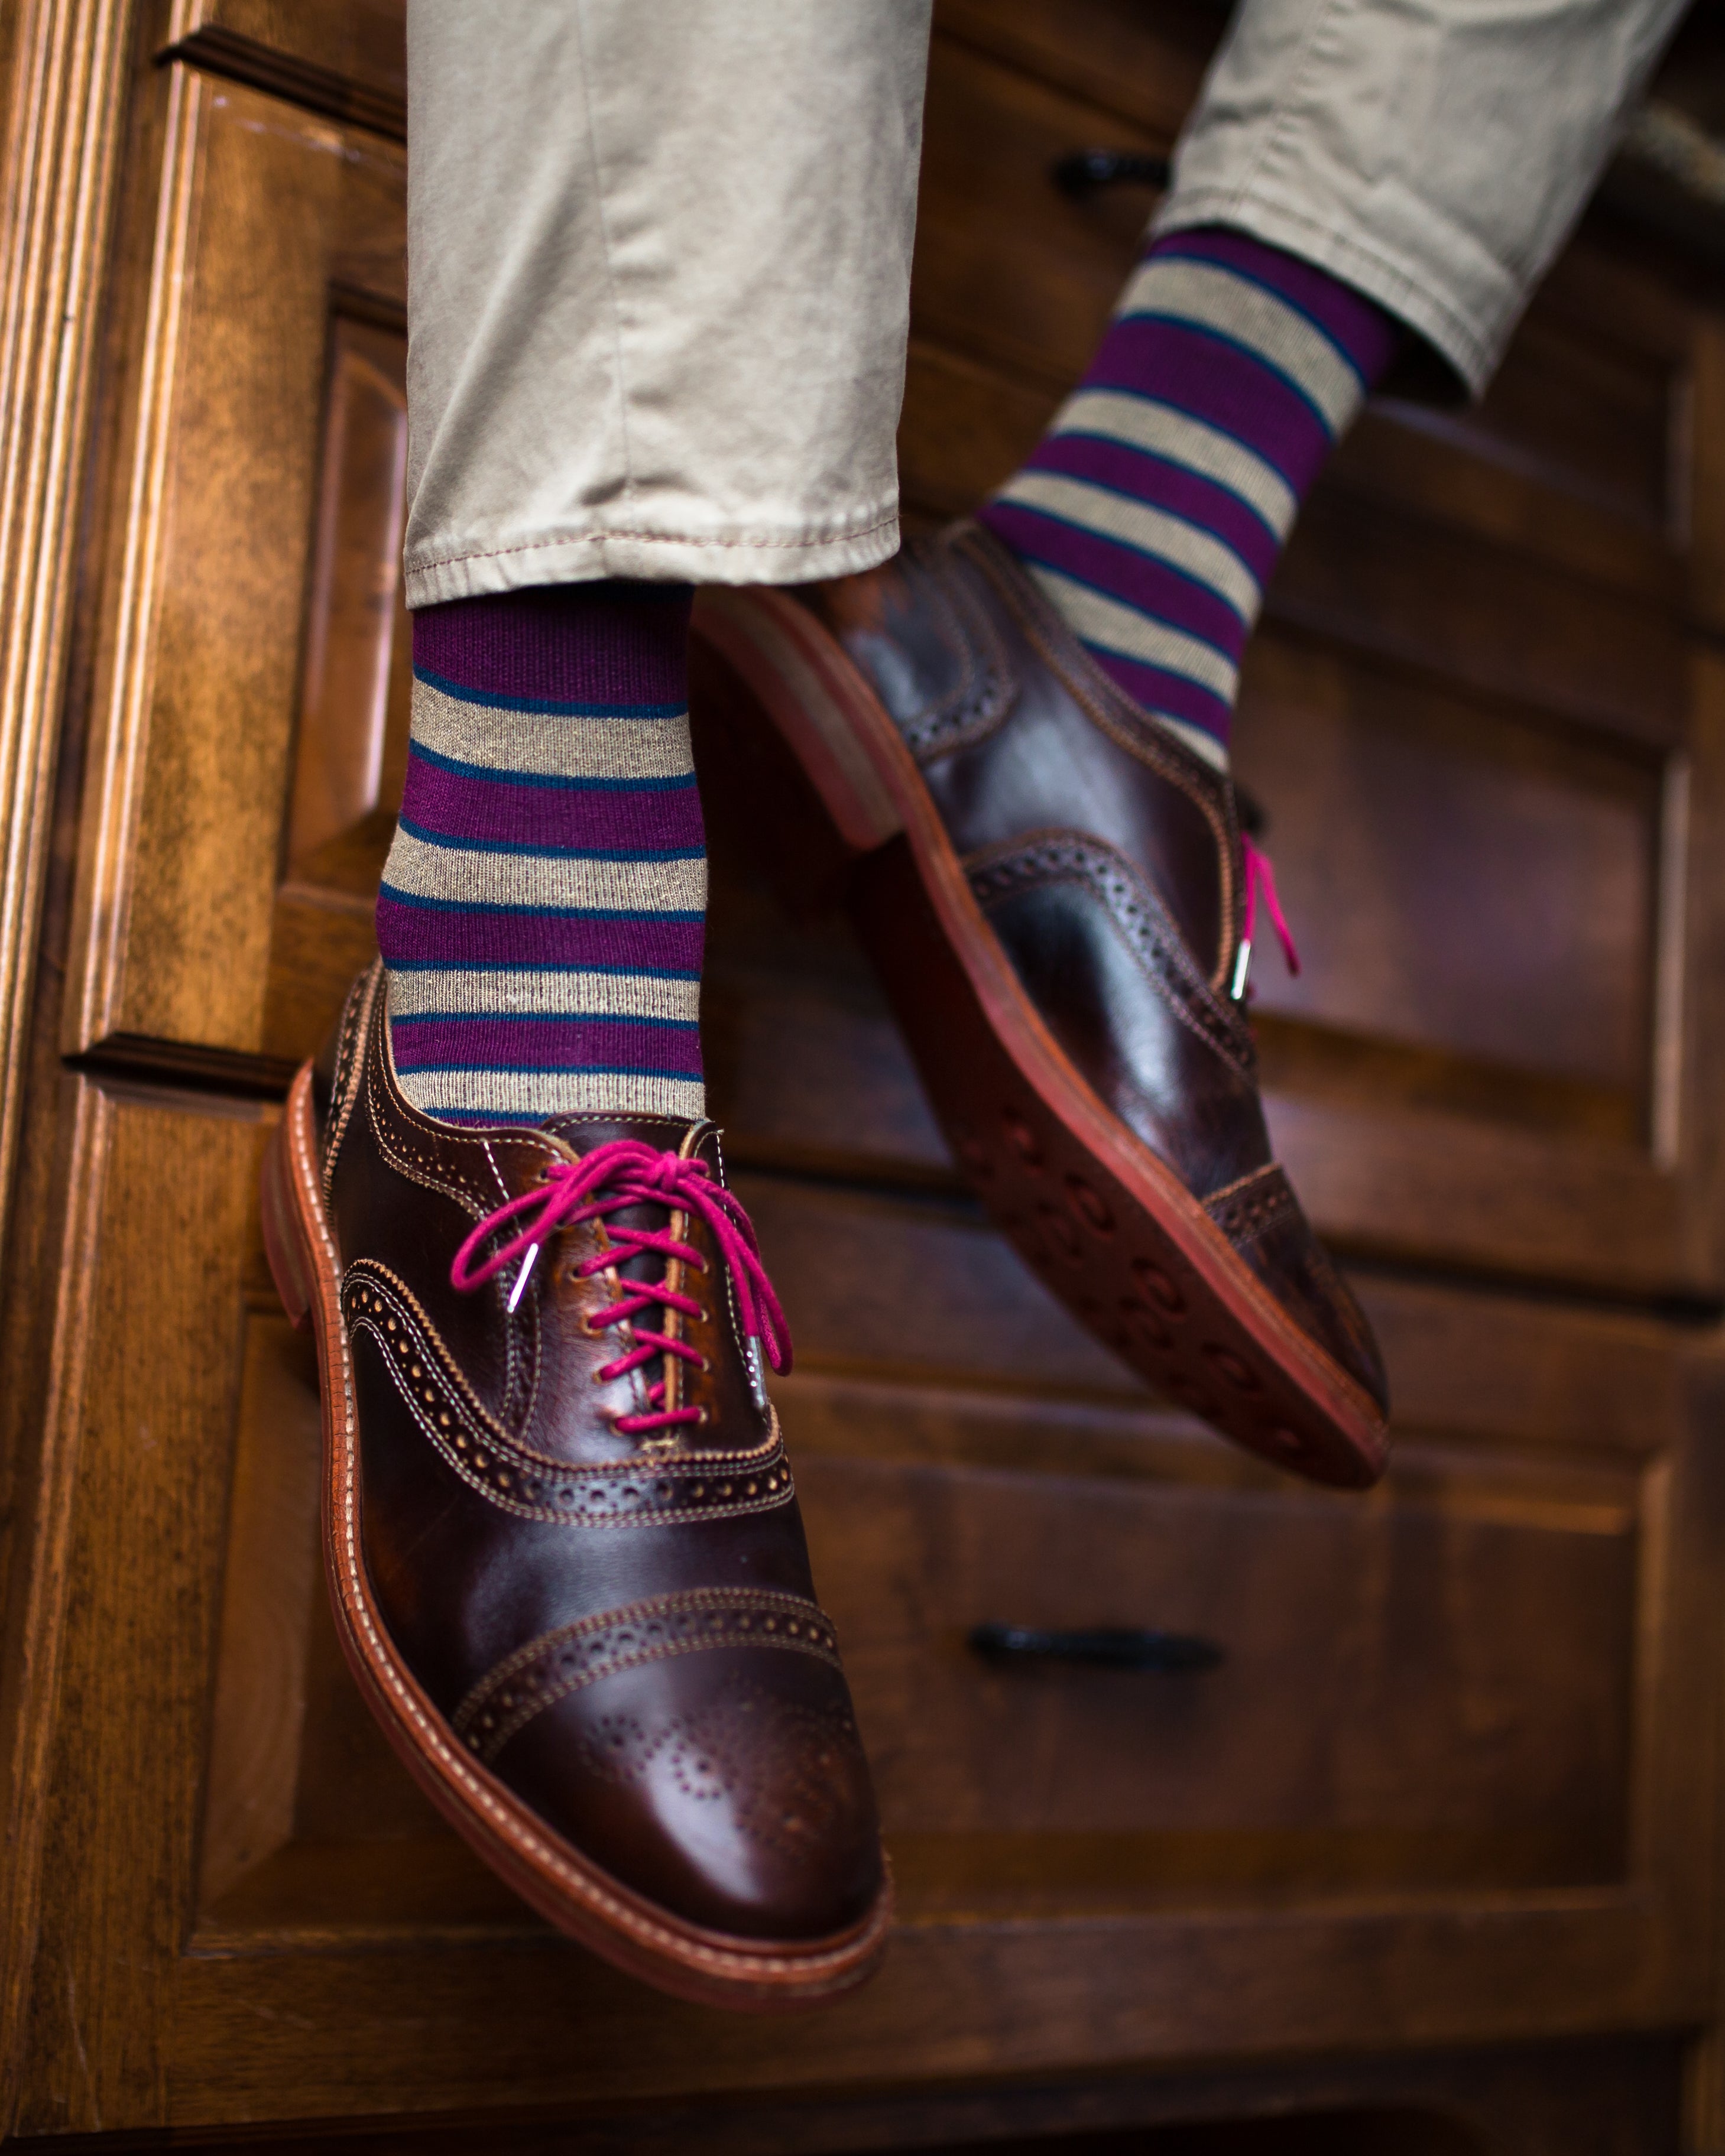 burgundy and light brown striped over the calf dress socks, dark brown dress shoes with pink laces, light beige pants